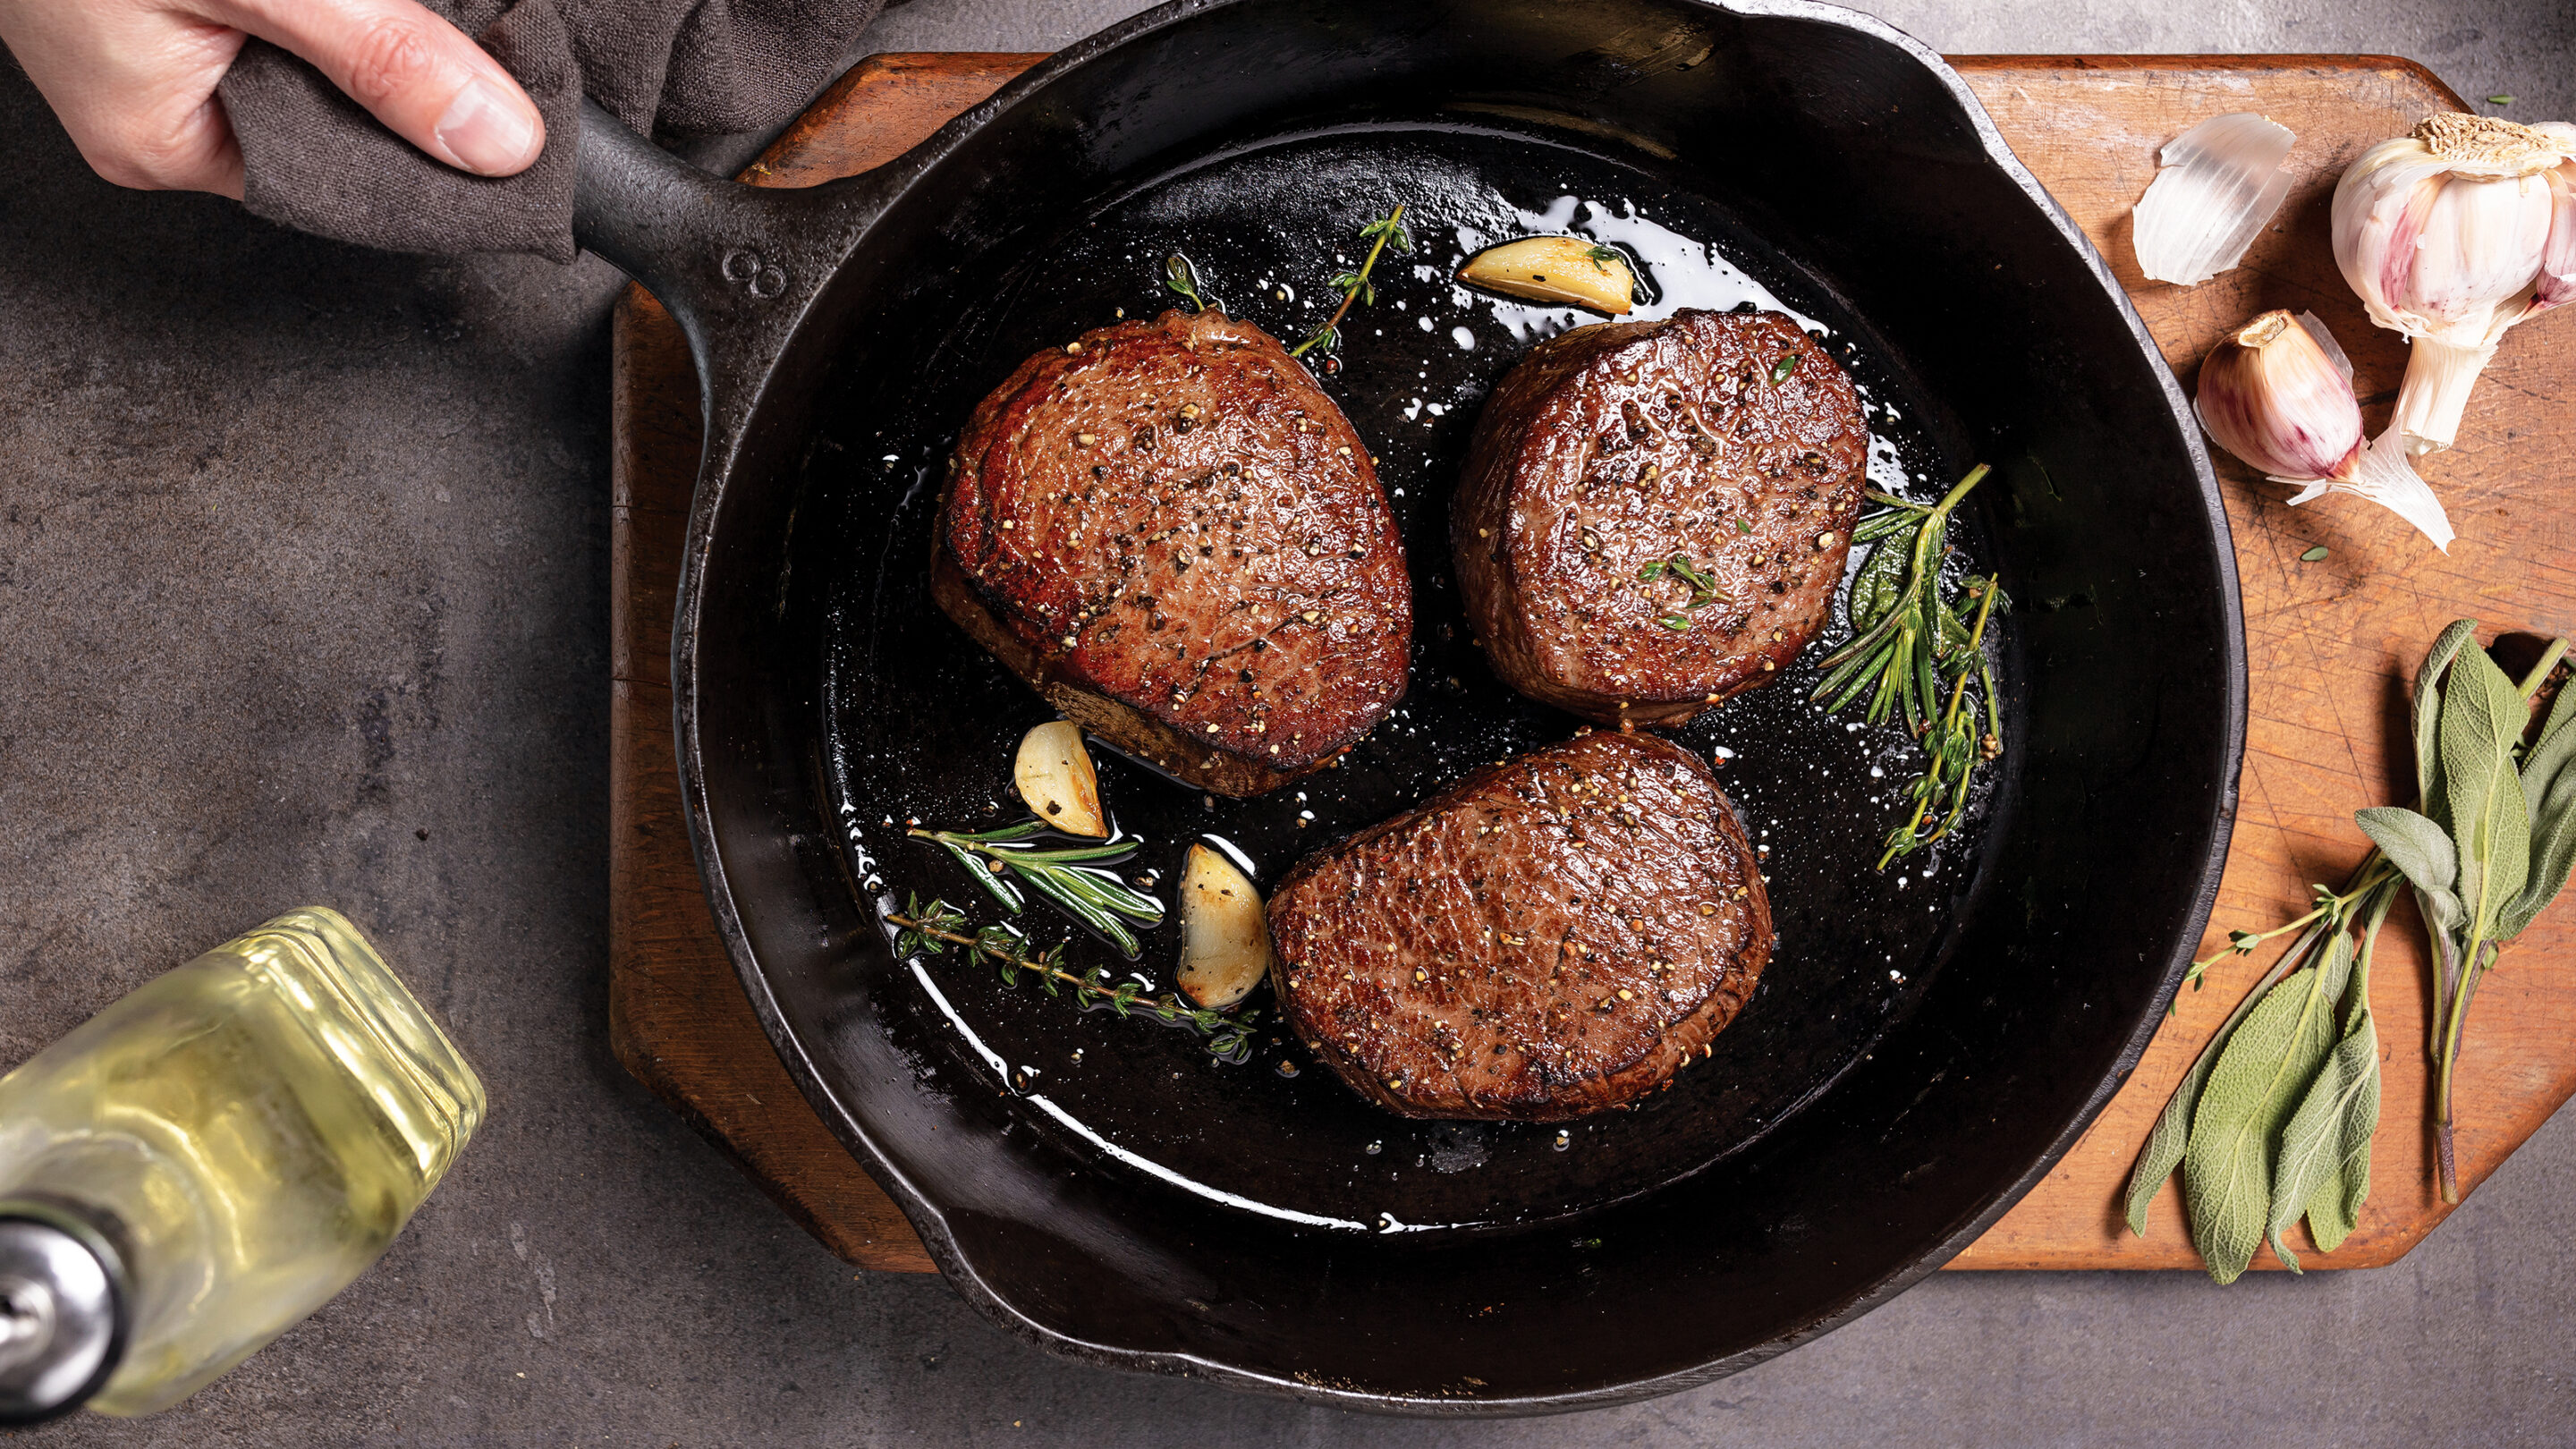 https://blog-content.omahasteaks.com/wp-content/uploads/2022/06/blogwp_how-to-clean-and-maintain-cast-iron-cookware-scaled-1.jpg